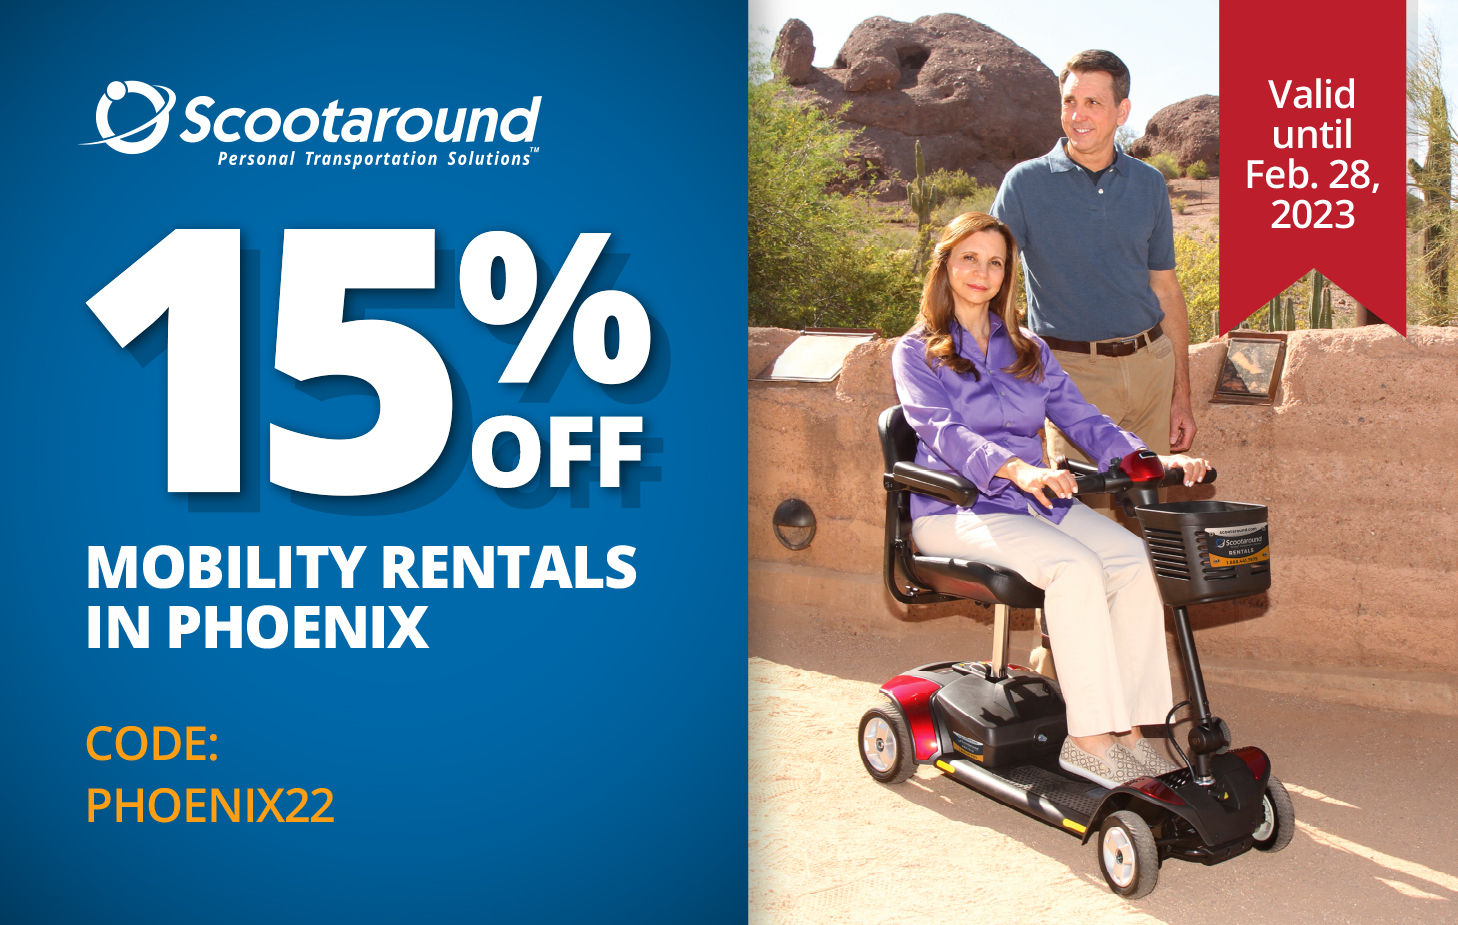 Save 15% on Mobility Rentals in Phoenix